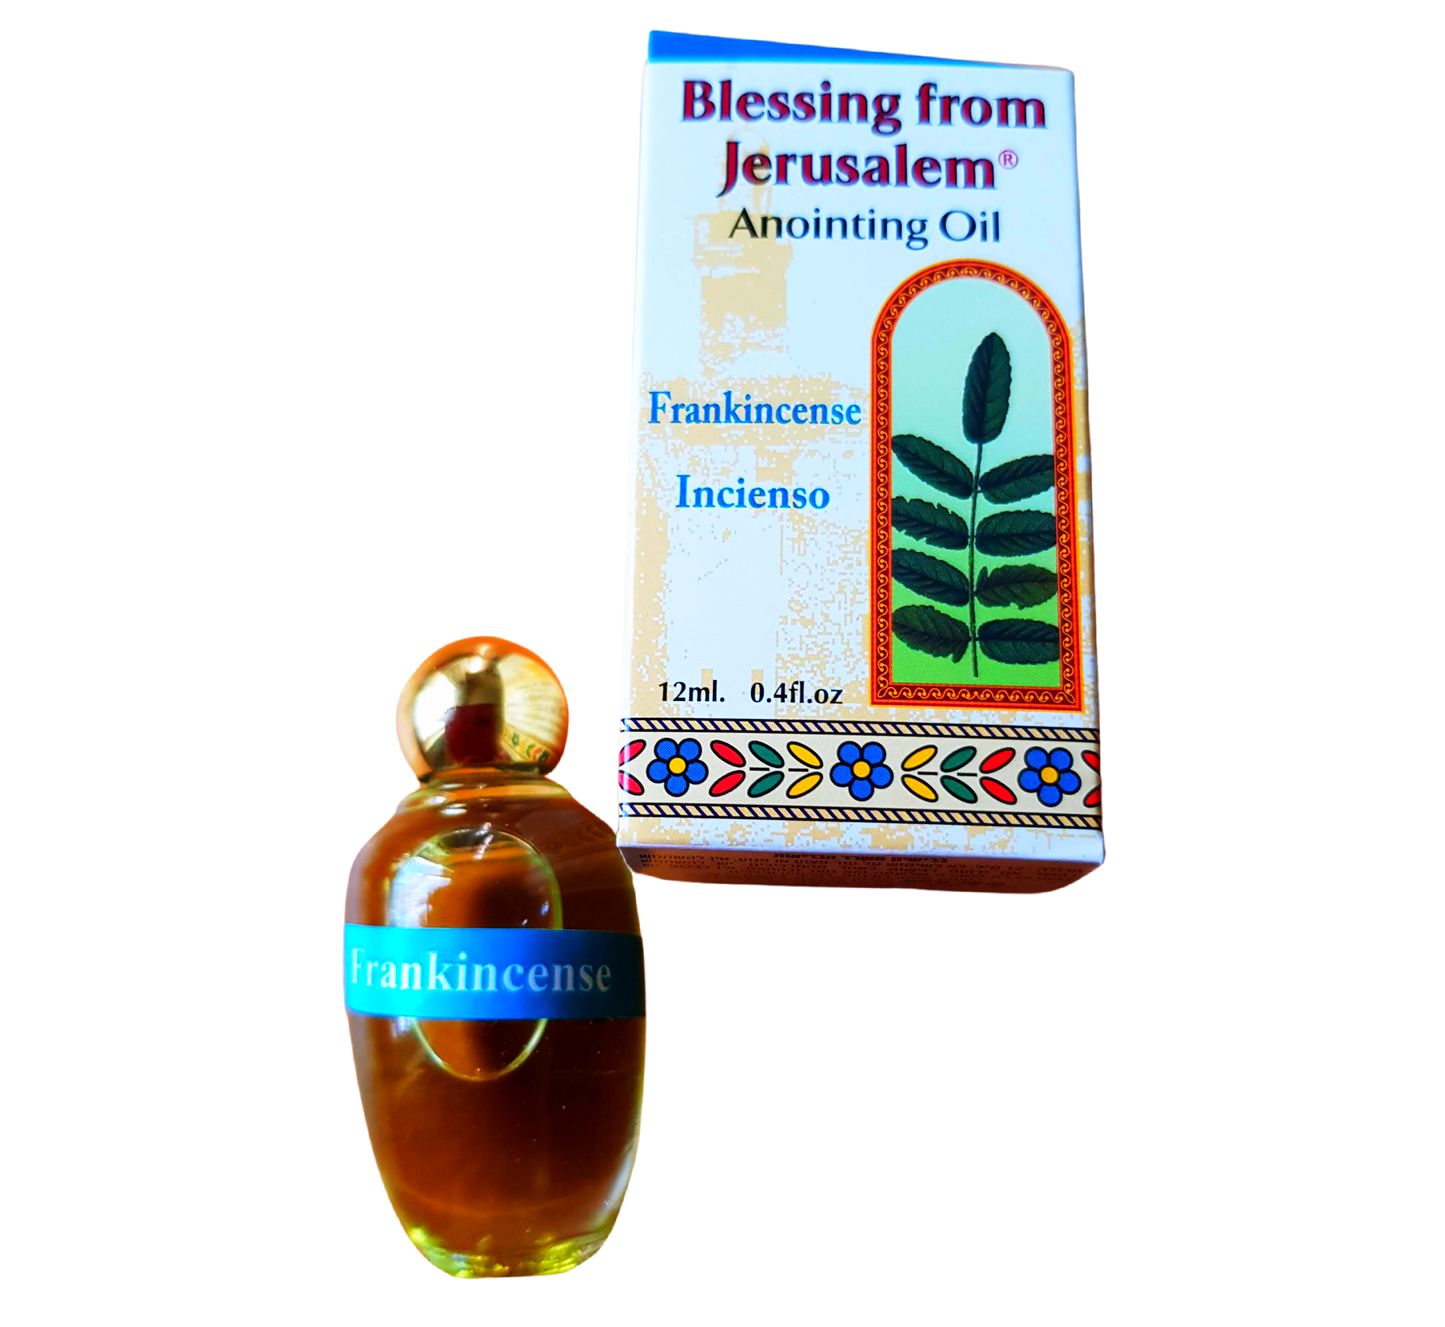 Bluenoemi Anointing Oil Frankincense Frankincense Incienso Anointing Oil Made in Israel the Land of the Bible 12 ml